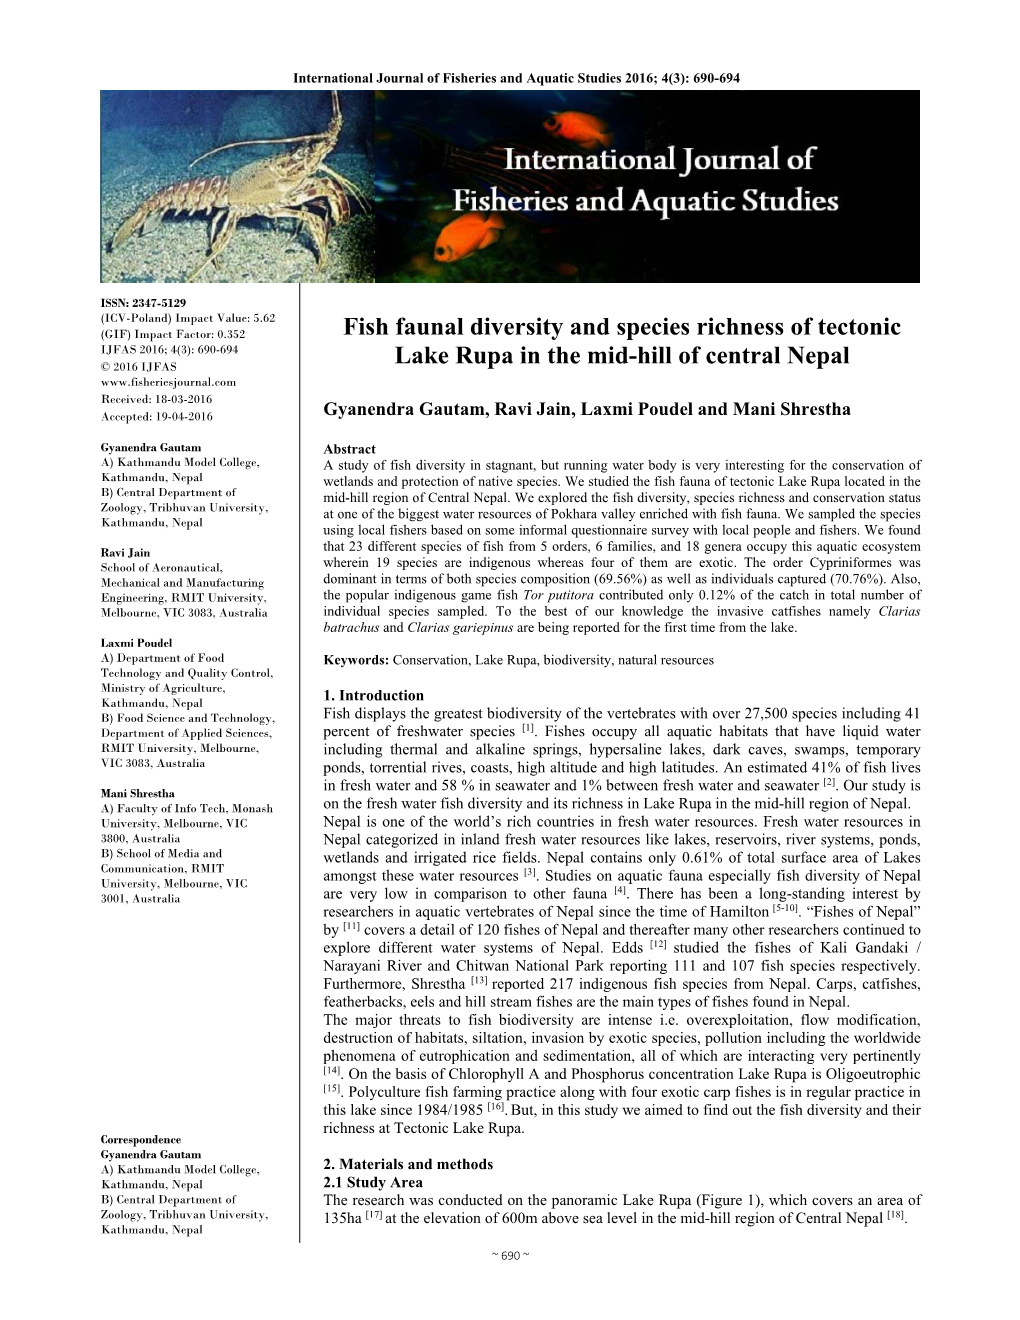 Fish Faunal Diversity and Species Richness of Tectonic Lake Rupa In